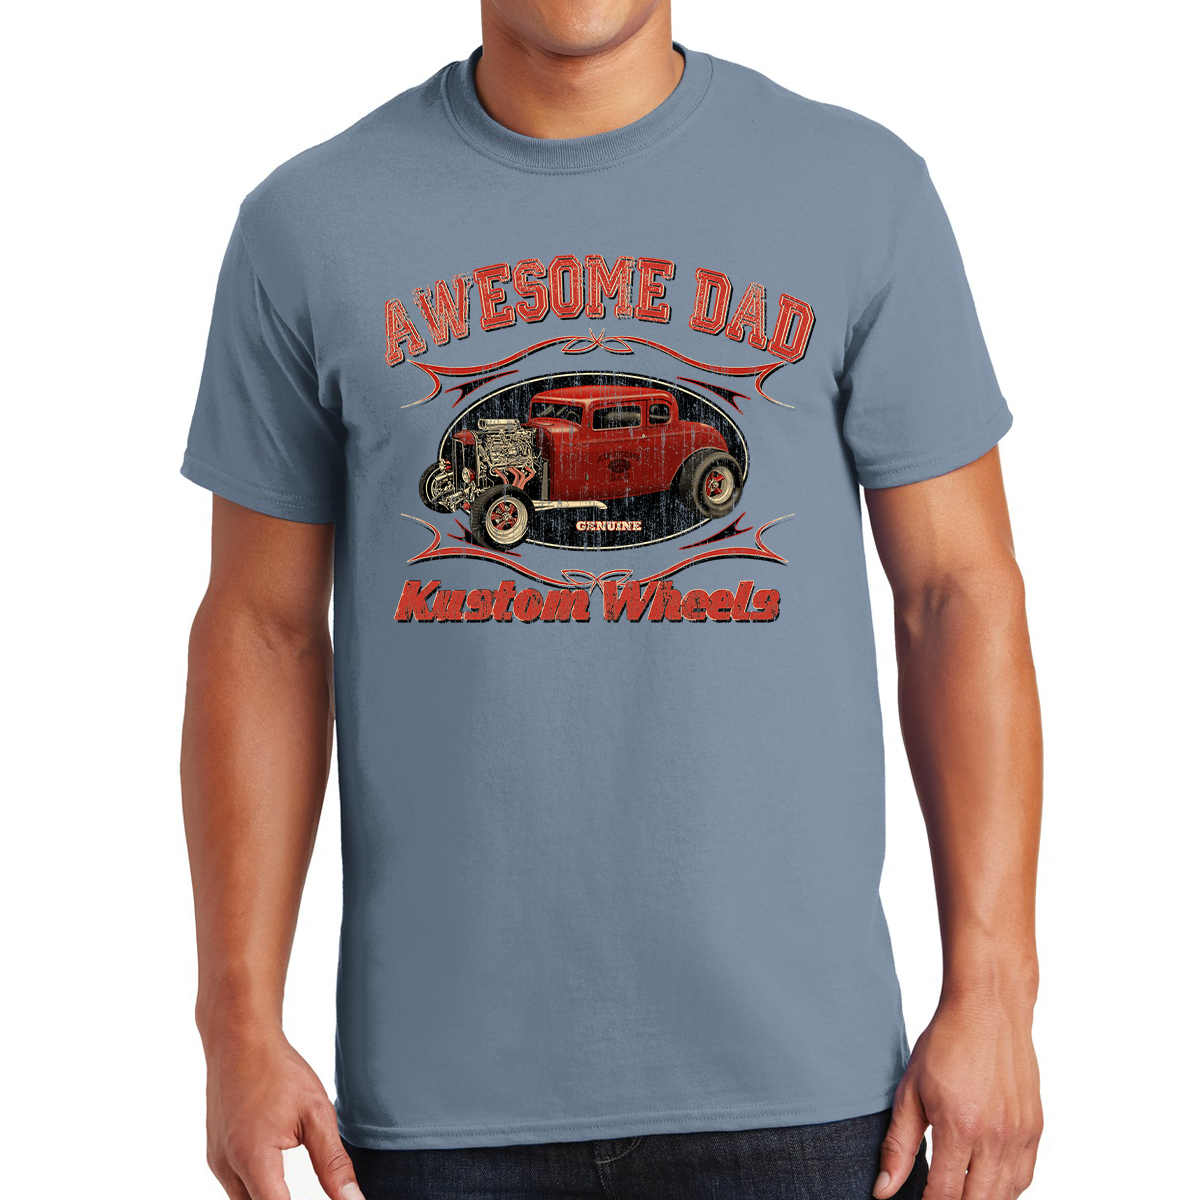 Awesome Dad Hot Rod Kustom Wheels Revving Up Fatherhood Gift For Dads T-shirt